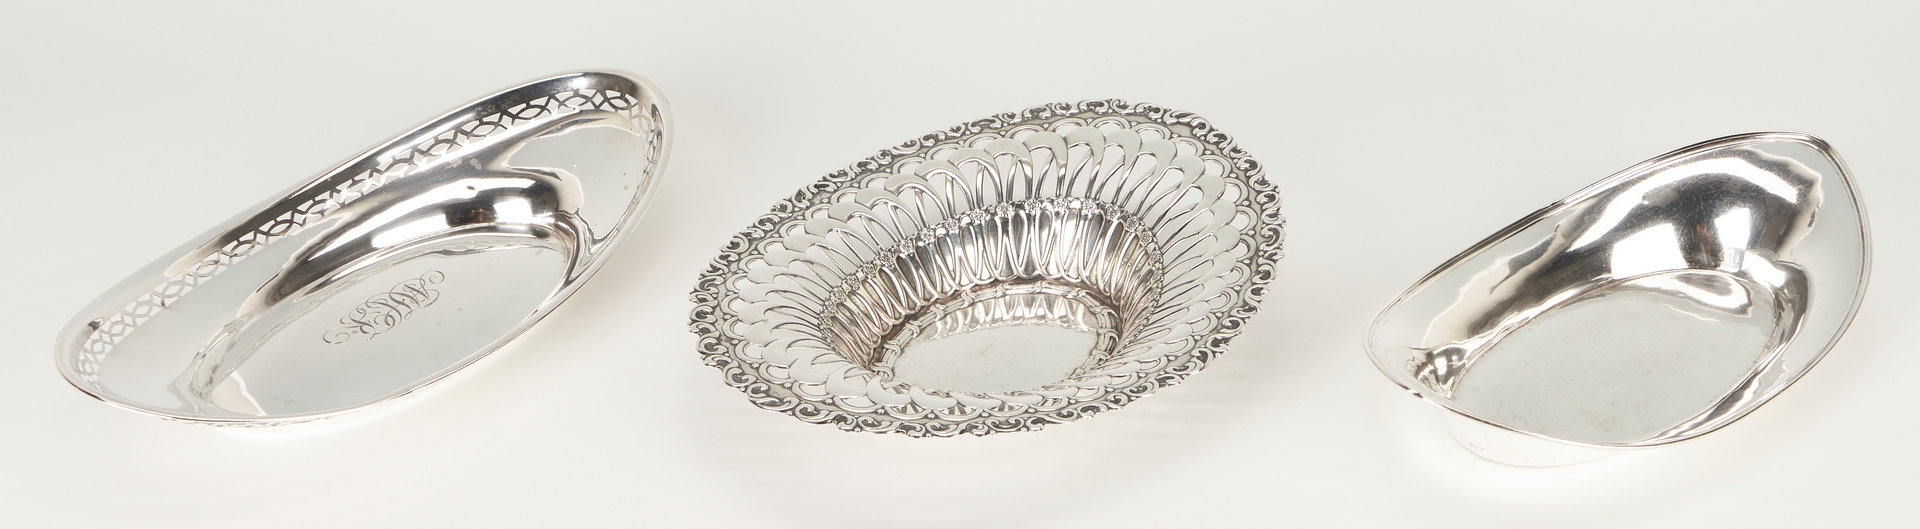 Lot 1257: 3 Whiting Sterling Silver Bread Trays, incl. Louis XV